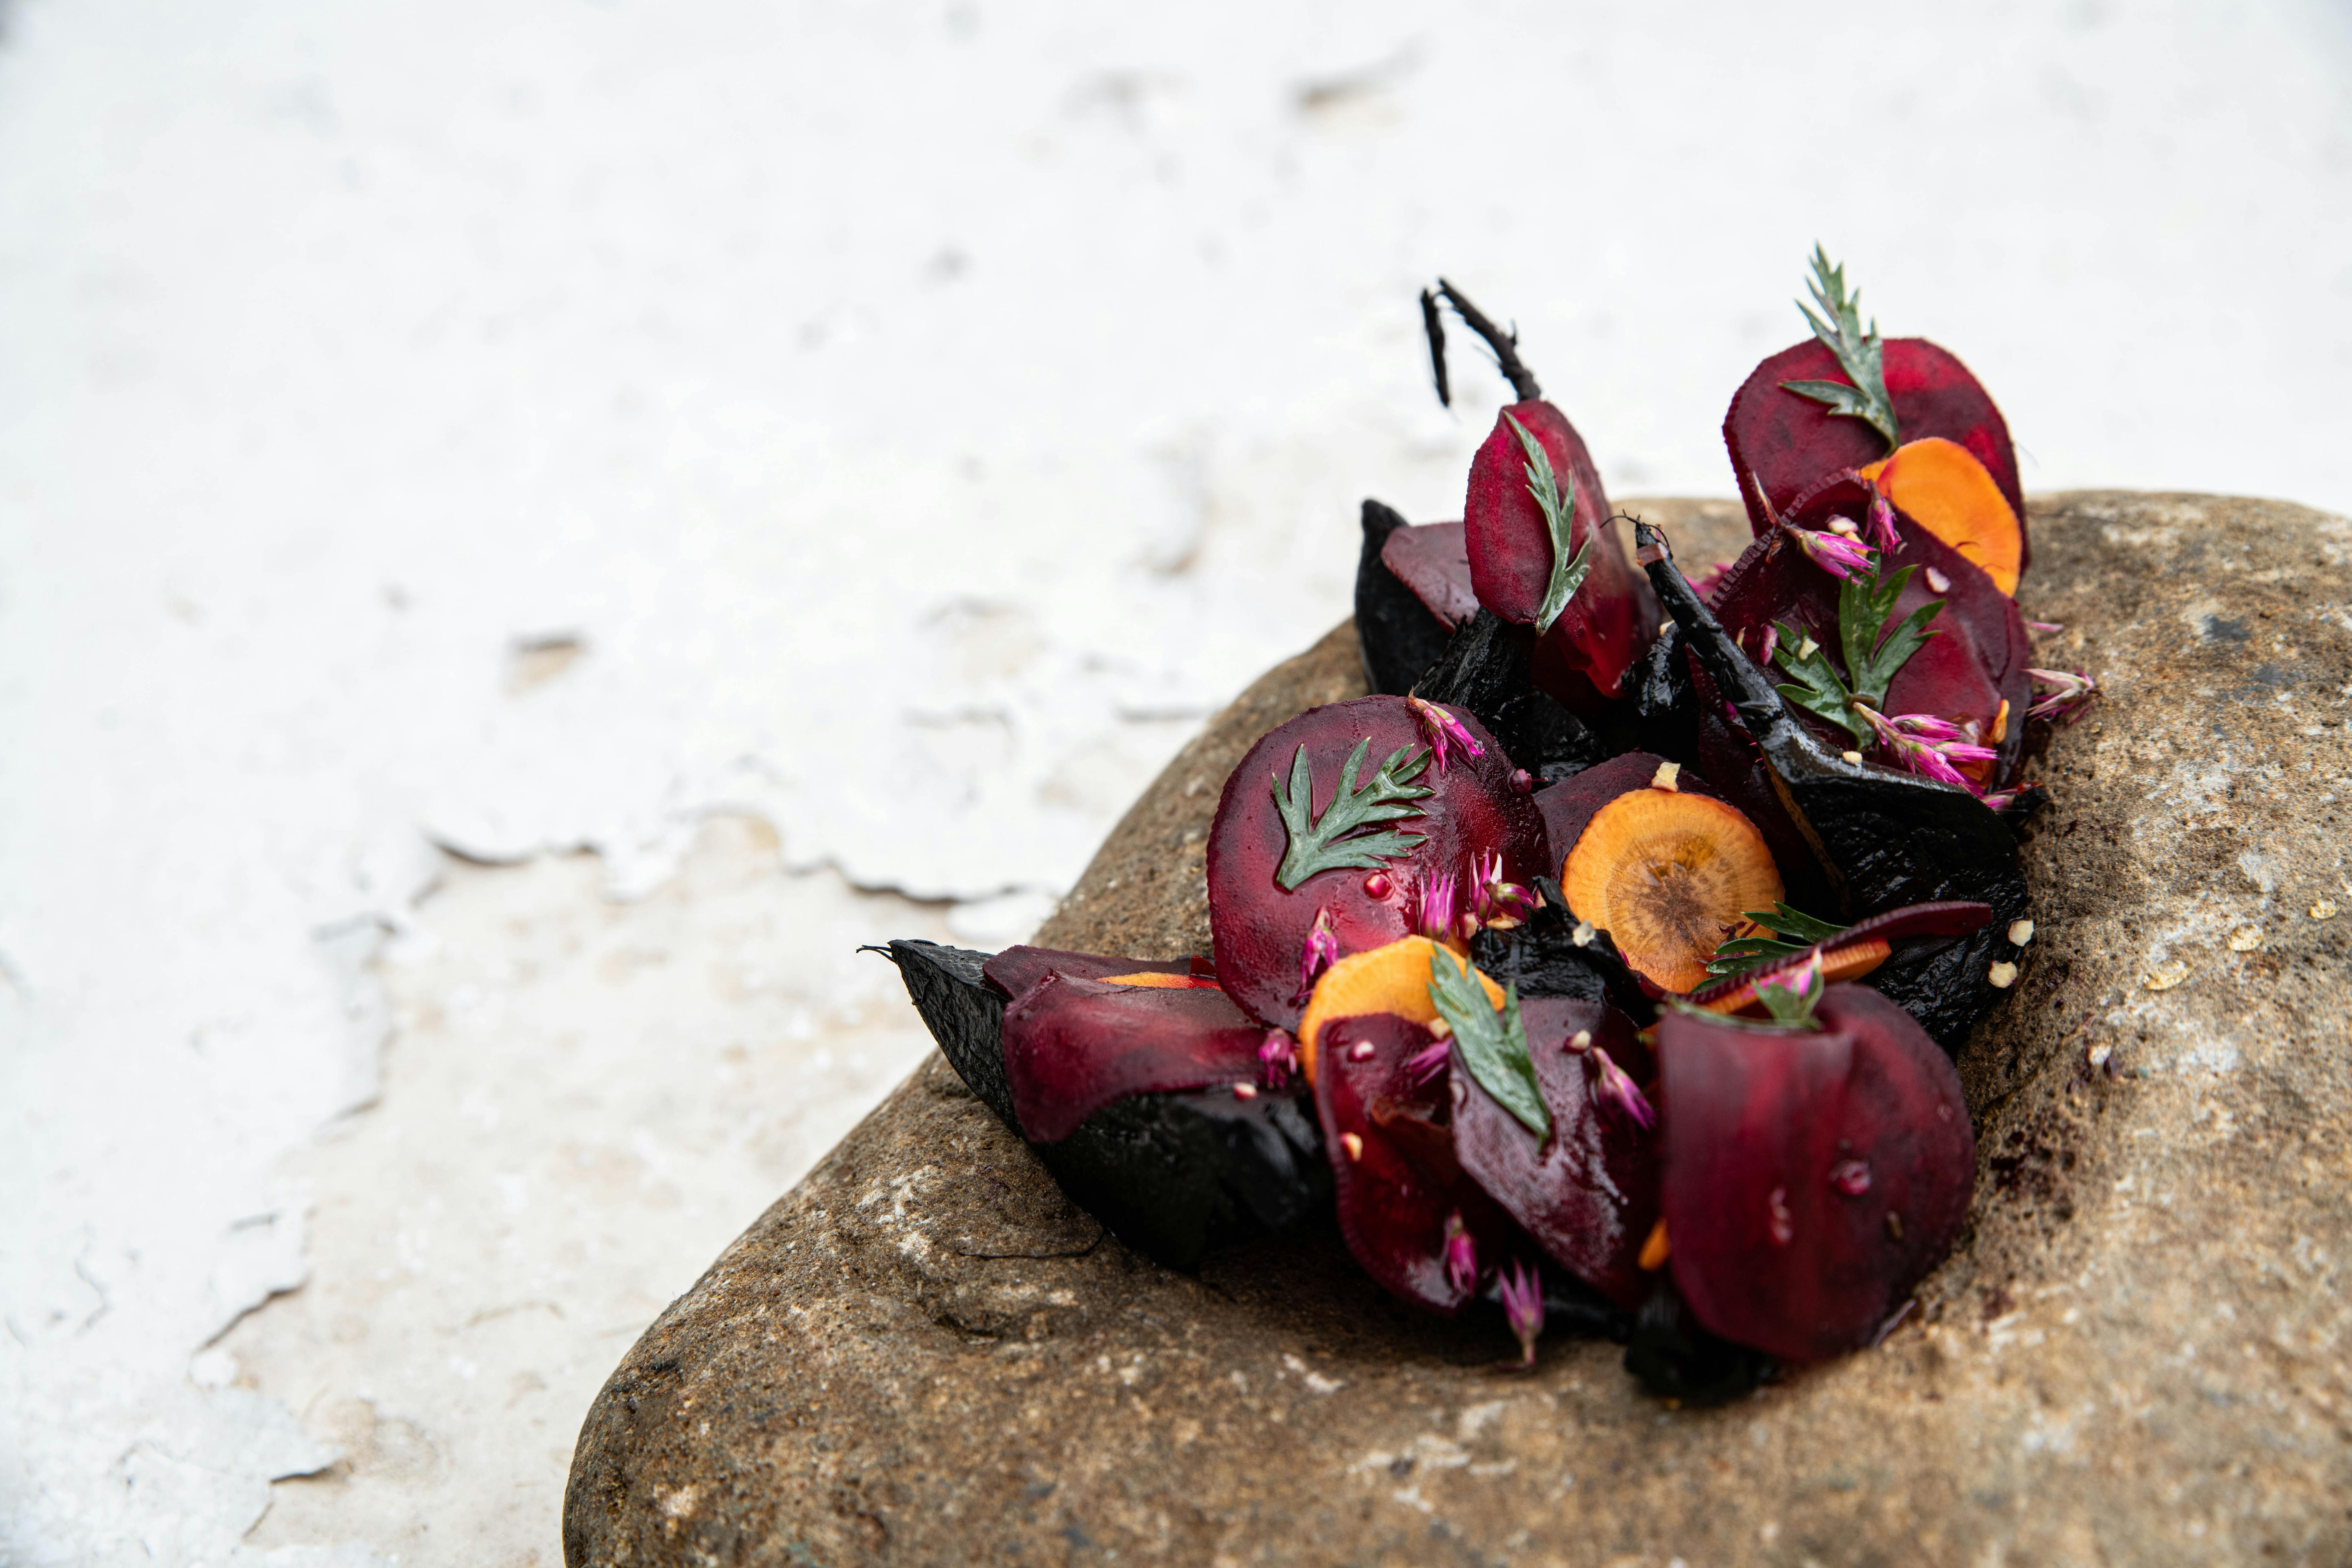 Smoked beetroot and pickled carrot salad served on a river rock